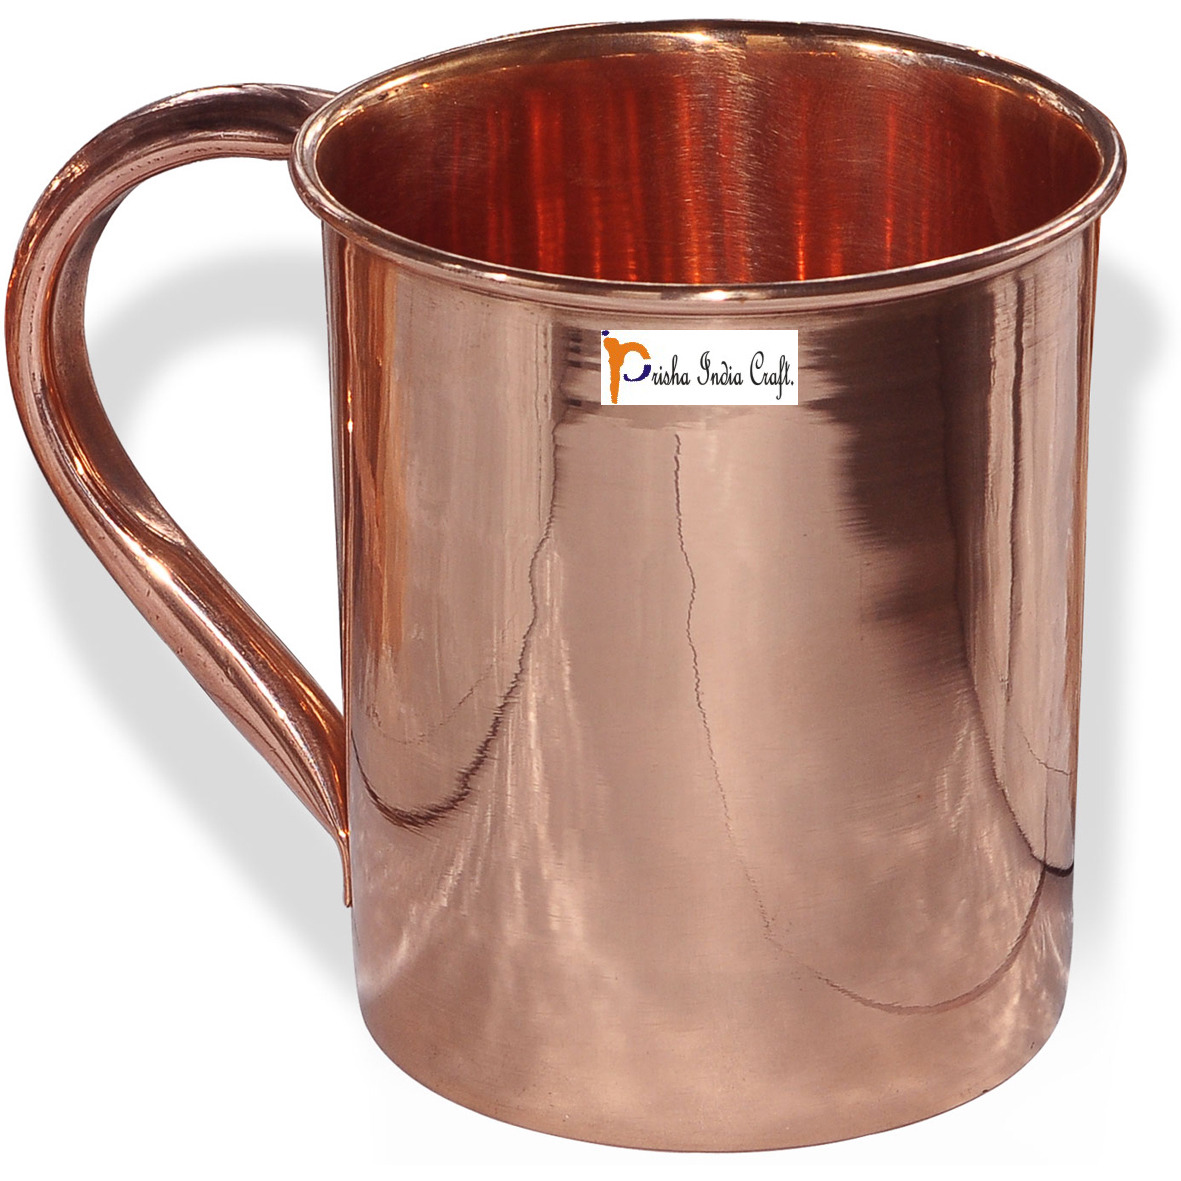 Set of 8 - Prisha India Craft B. Copper Mug for Moscow Mules 450 ML / 15 oz - 100% pure copper - Lacquered Finish Mule Cup, Moscow Mule Cocktail Cup, Copper Mugs, Cocktail Mugs with No Inner Linings